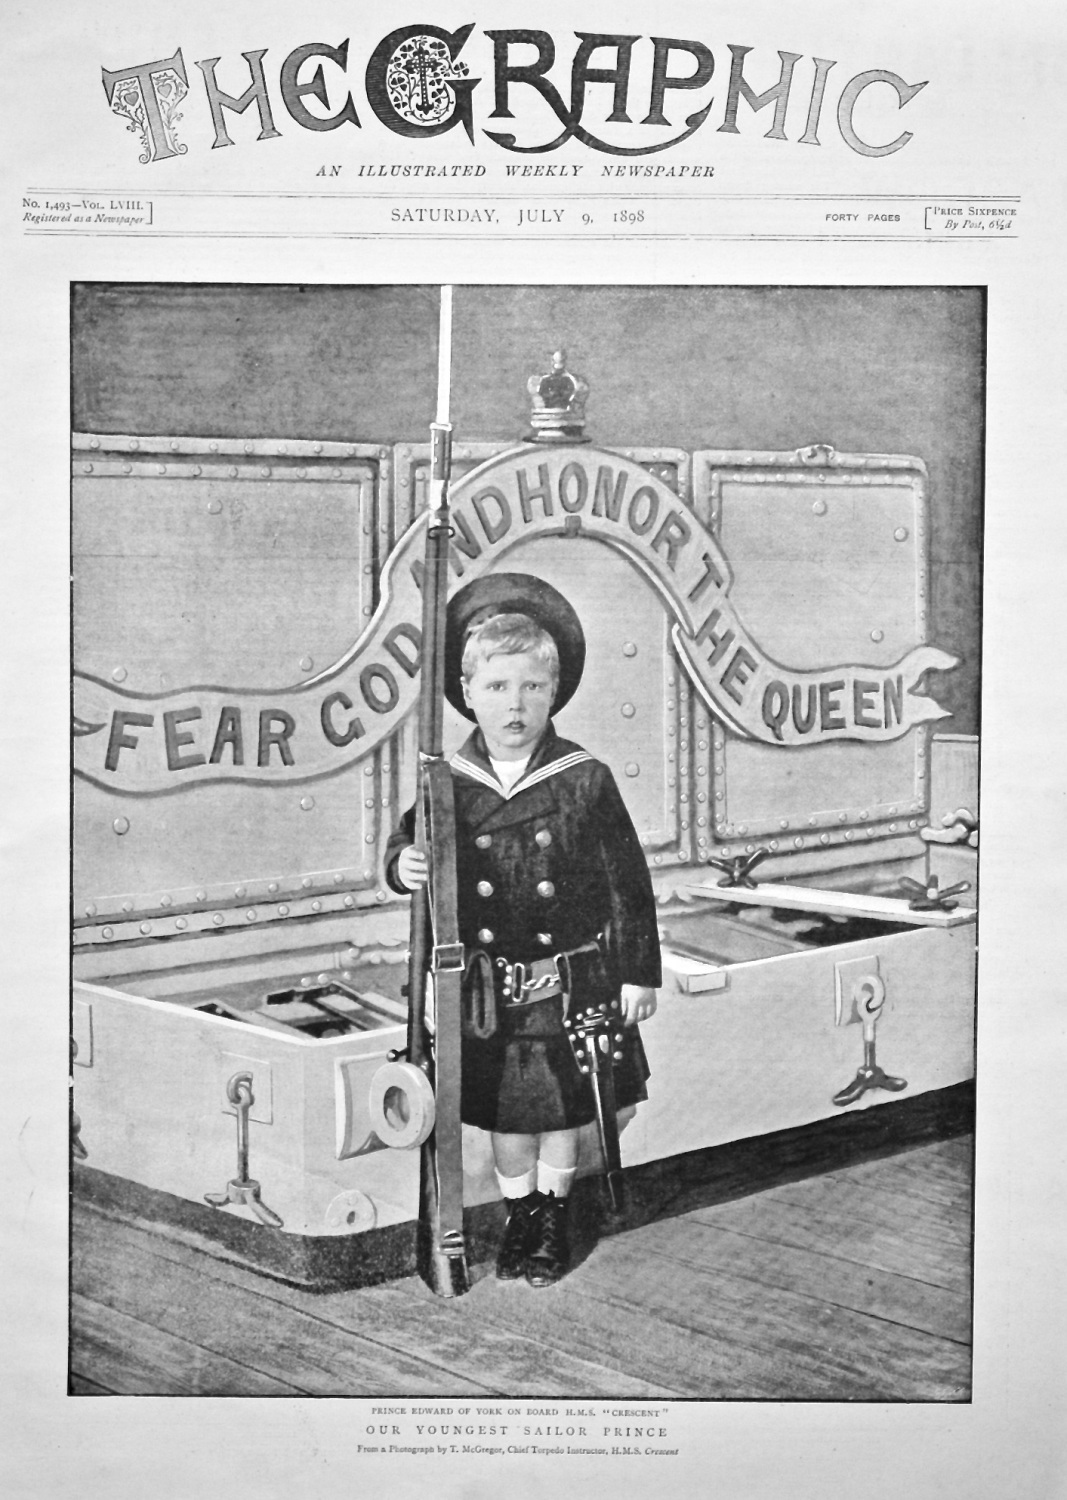 Our Youngest Sailor Prince : Prince Edward of York on Board H.M.S. 